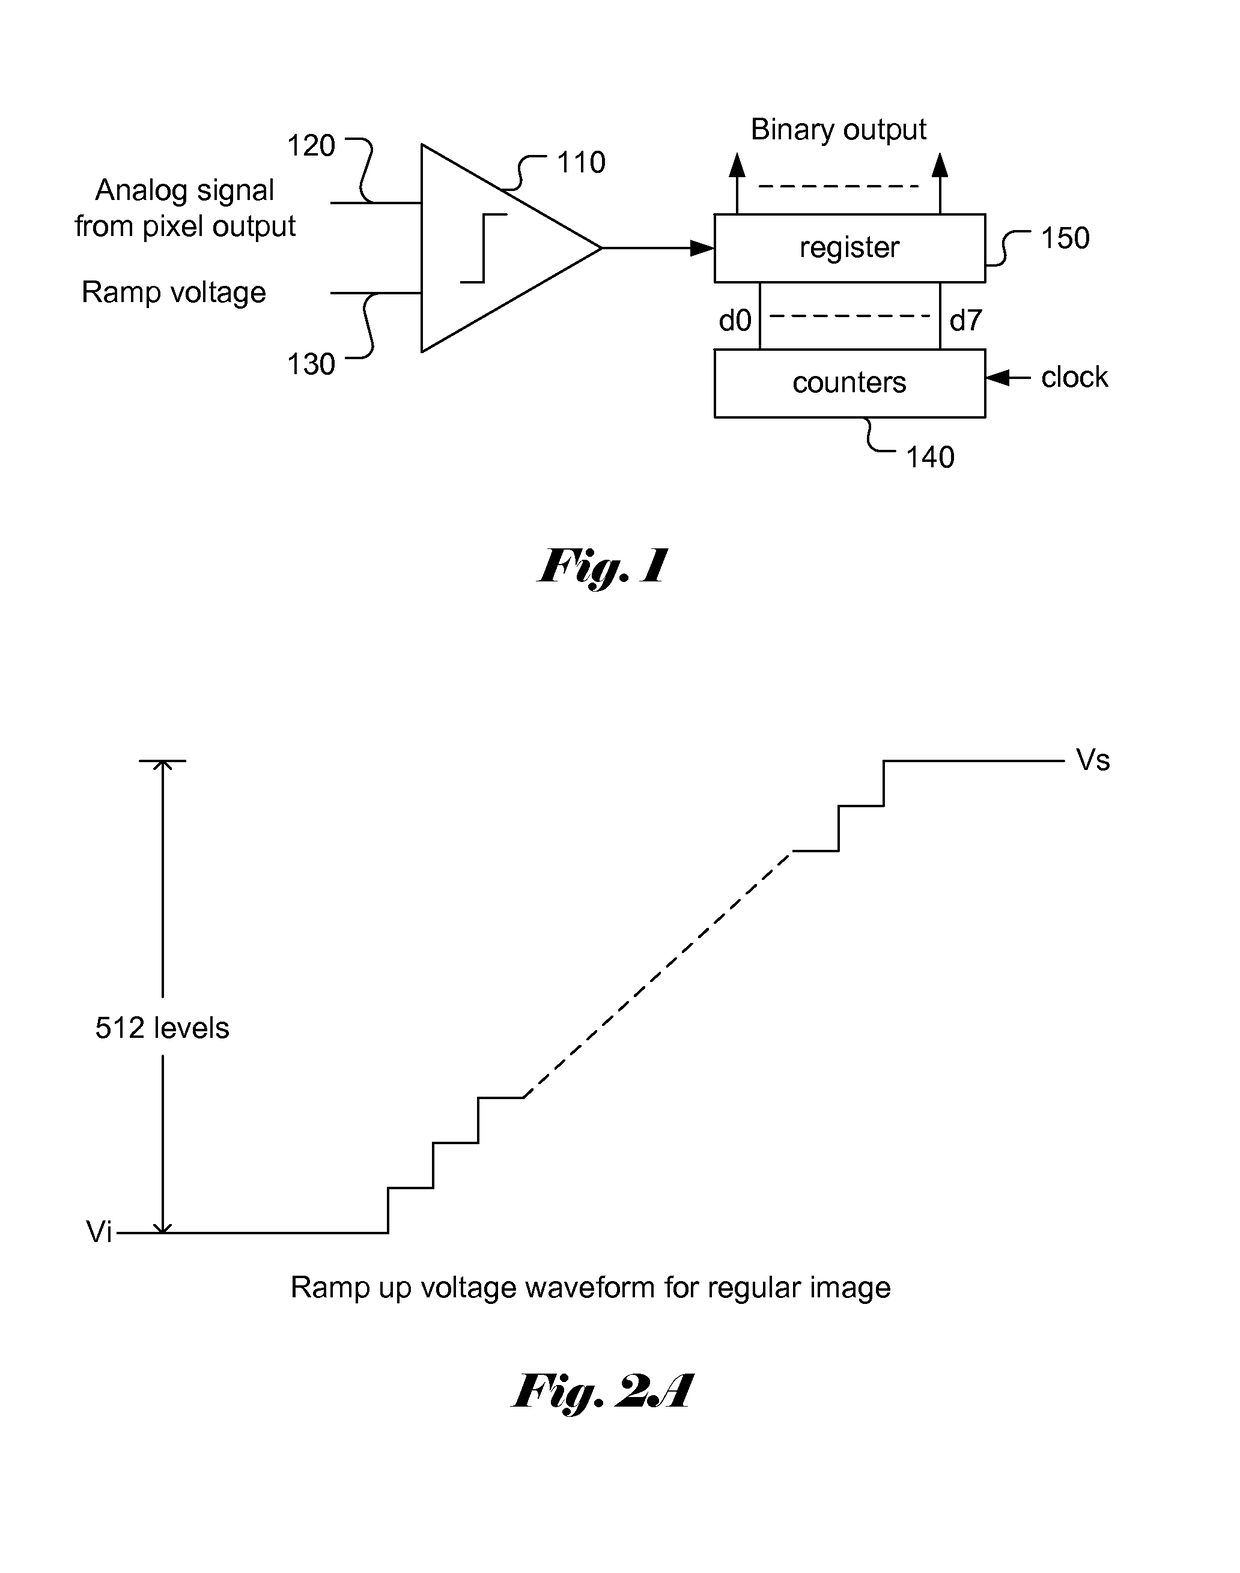 Single Image Sensor for Capturing Mixed Structured-light Images and Regular Images